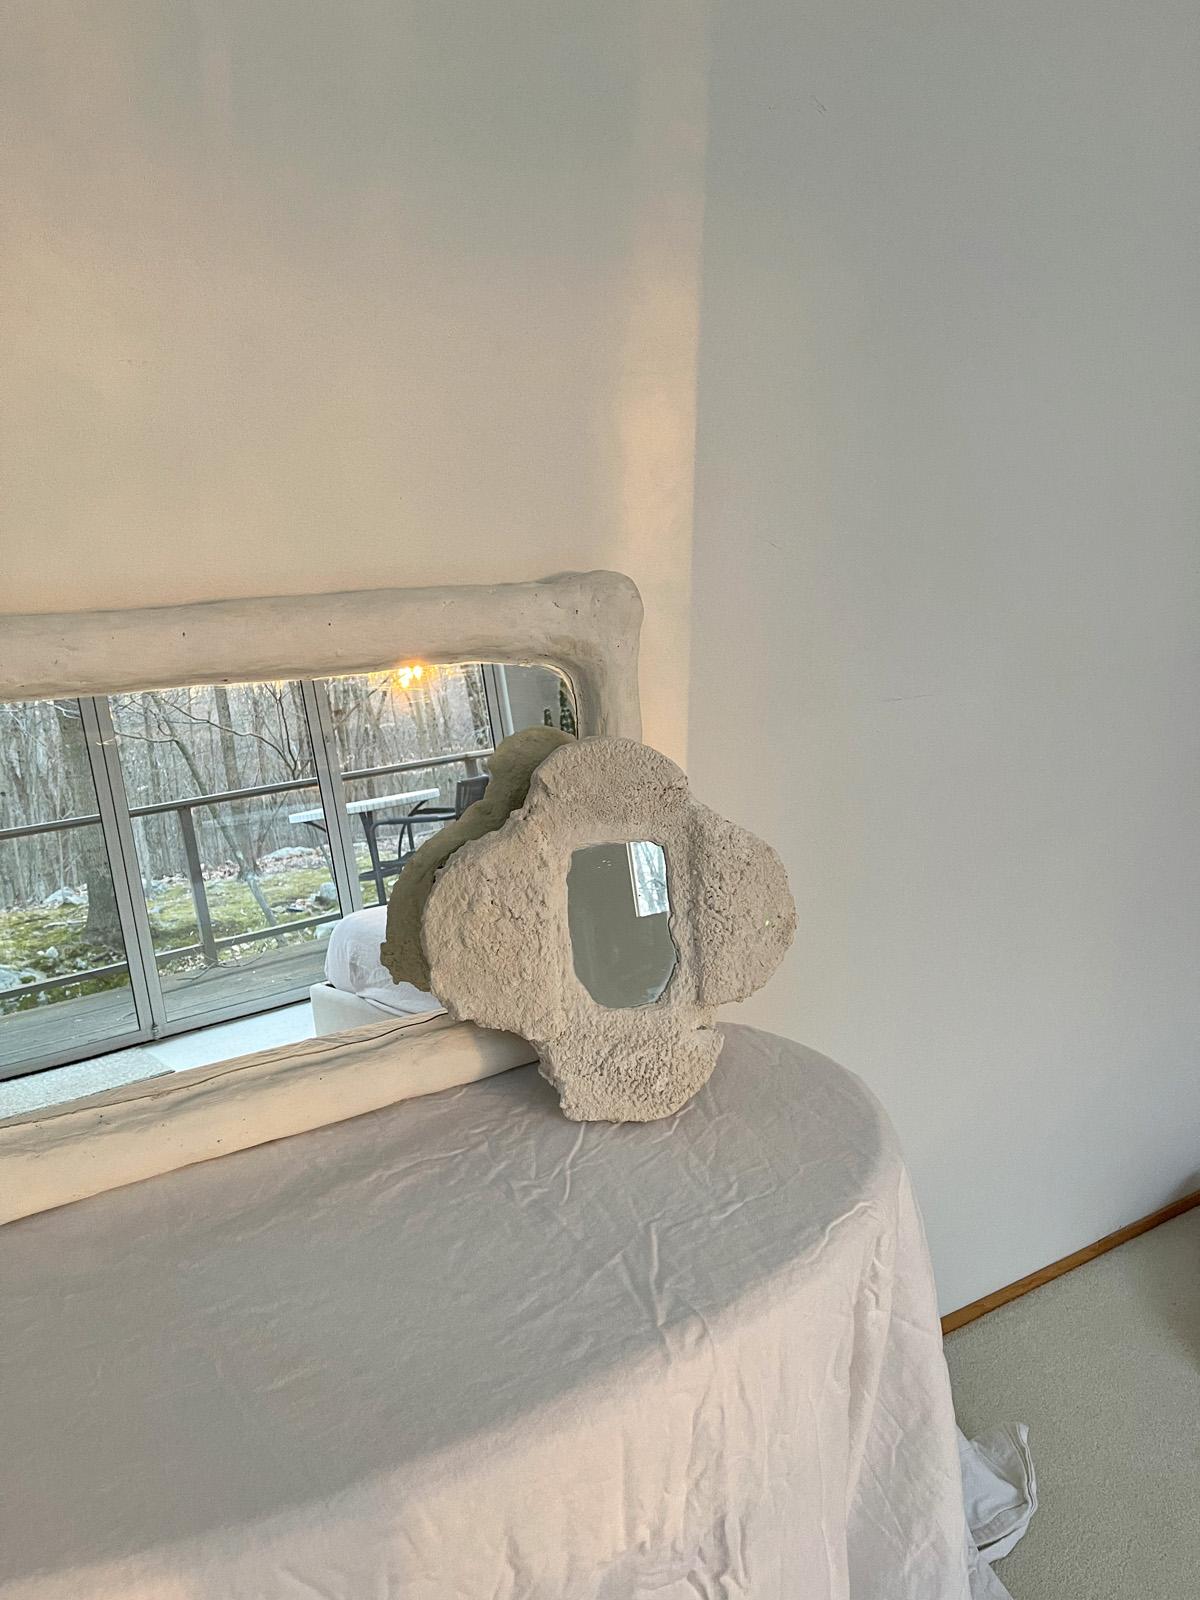 Dainty - yet still bringing such a presence - these clover-shaped mirrors are bound to bring you some good luck. They're such a simple way of adding a powerful accent to any space. And the big bonus is - they’re made from eco-friendly materials. Due